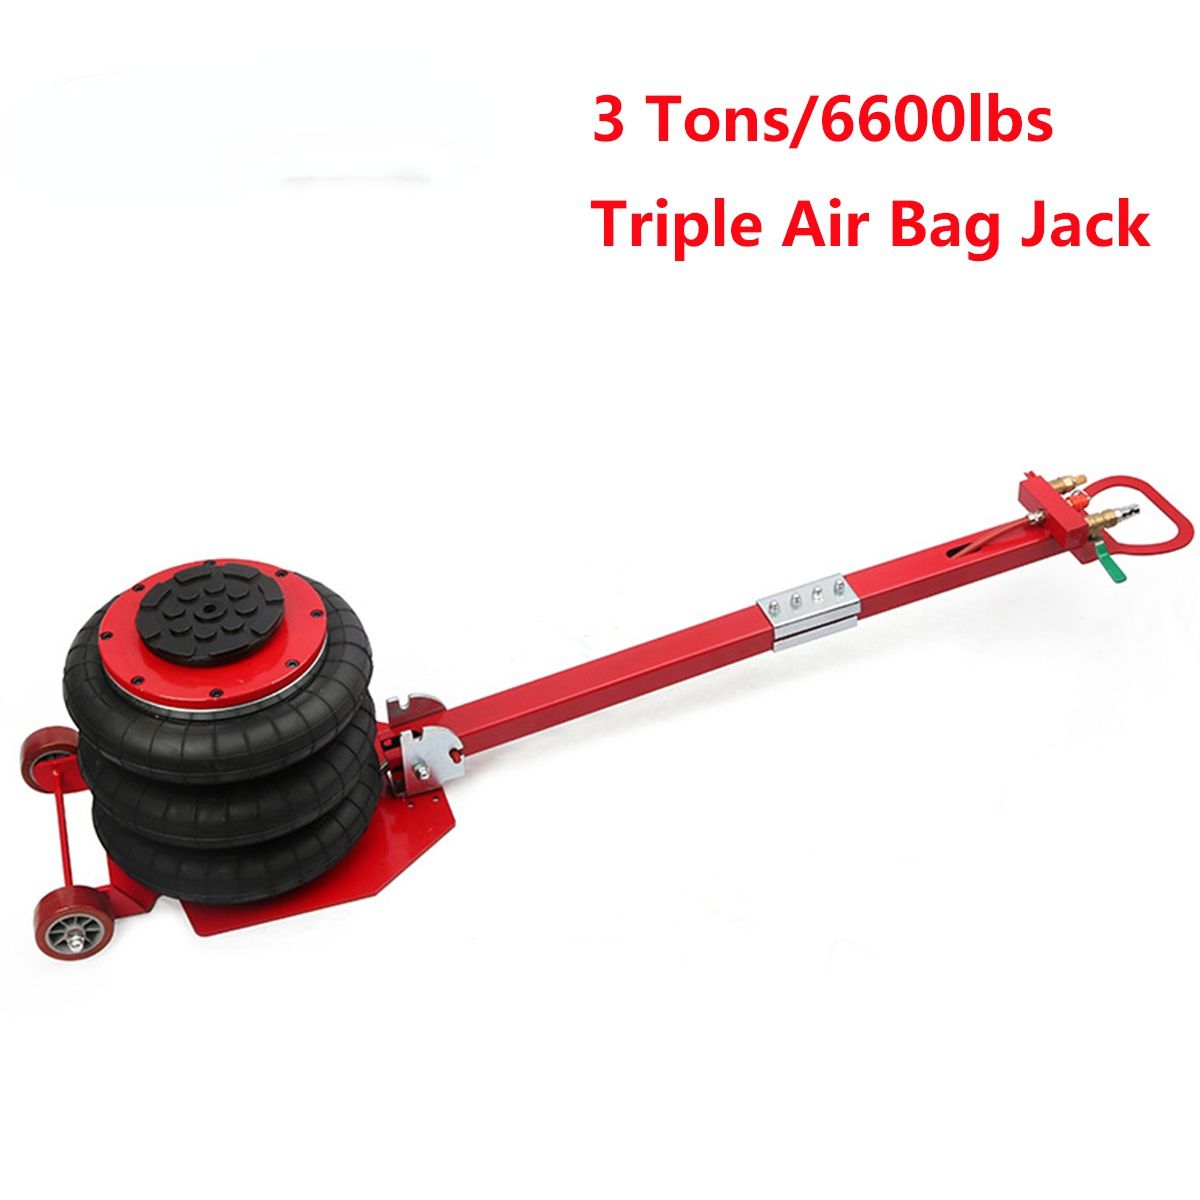 New Arrival 3 Tons/6600lbs Folding Triple Air Bag Jack Pneumatic Car Jack Stand Automotive Lifting Tools Red